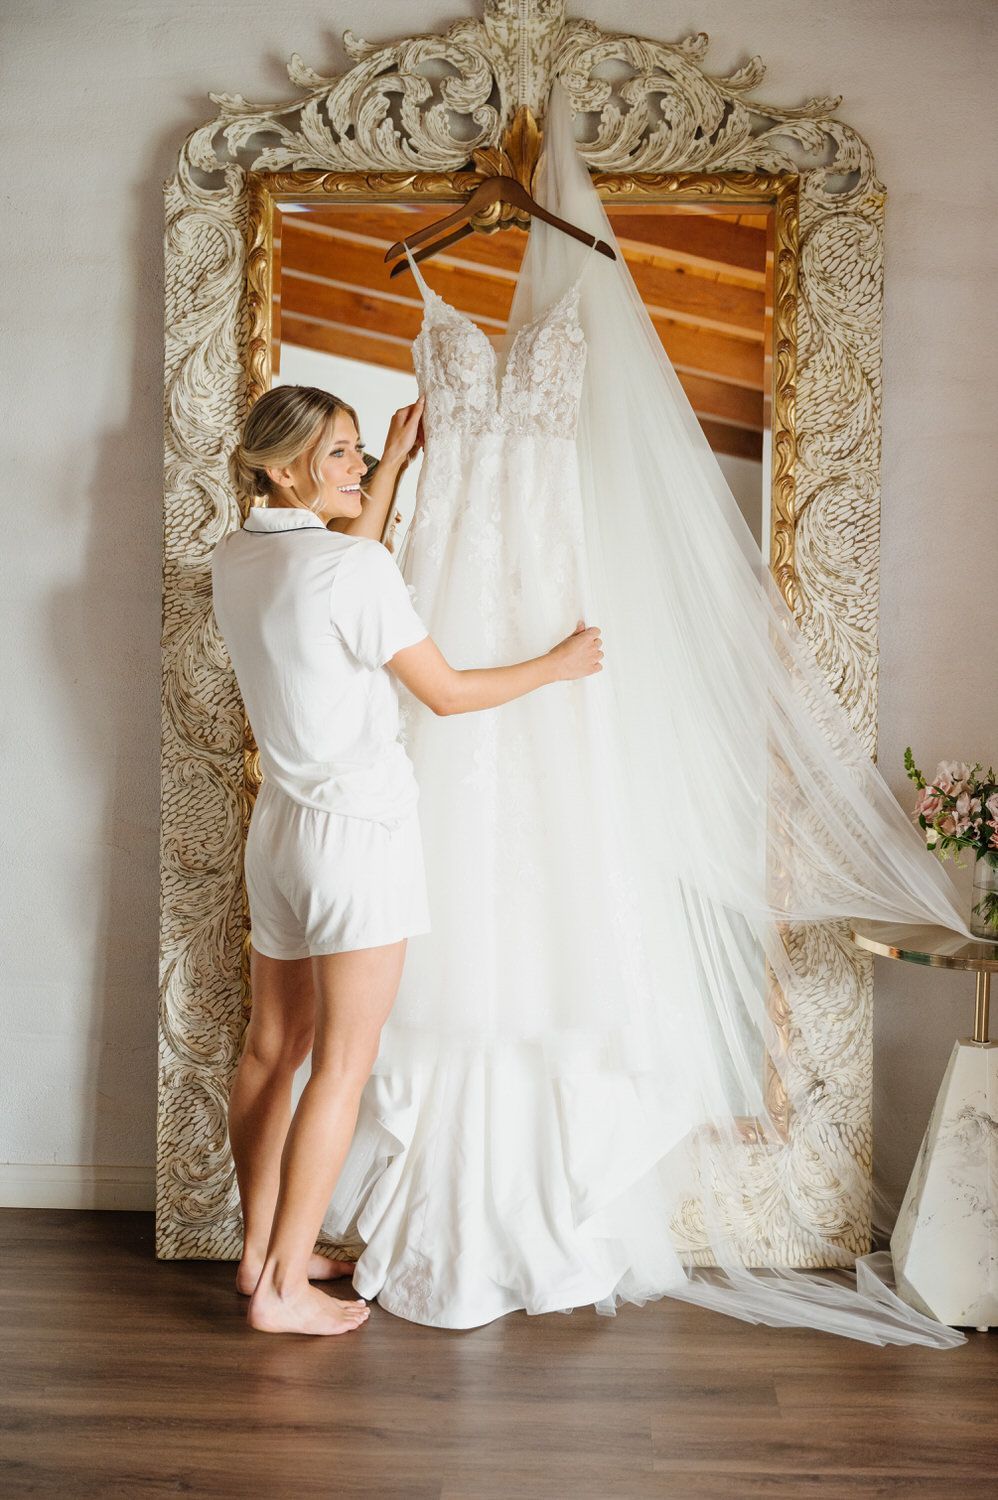 A woman is holding a wedding dress in front of a mirror.